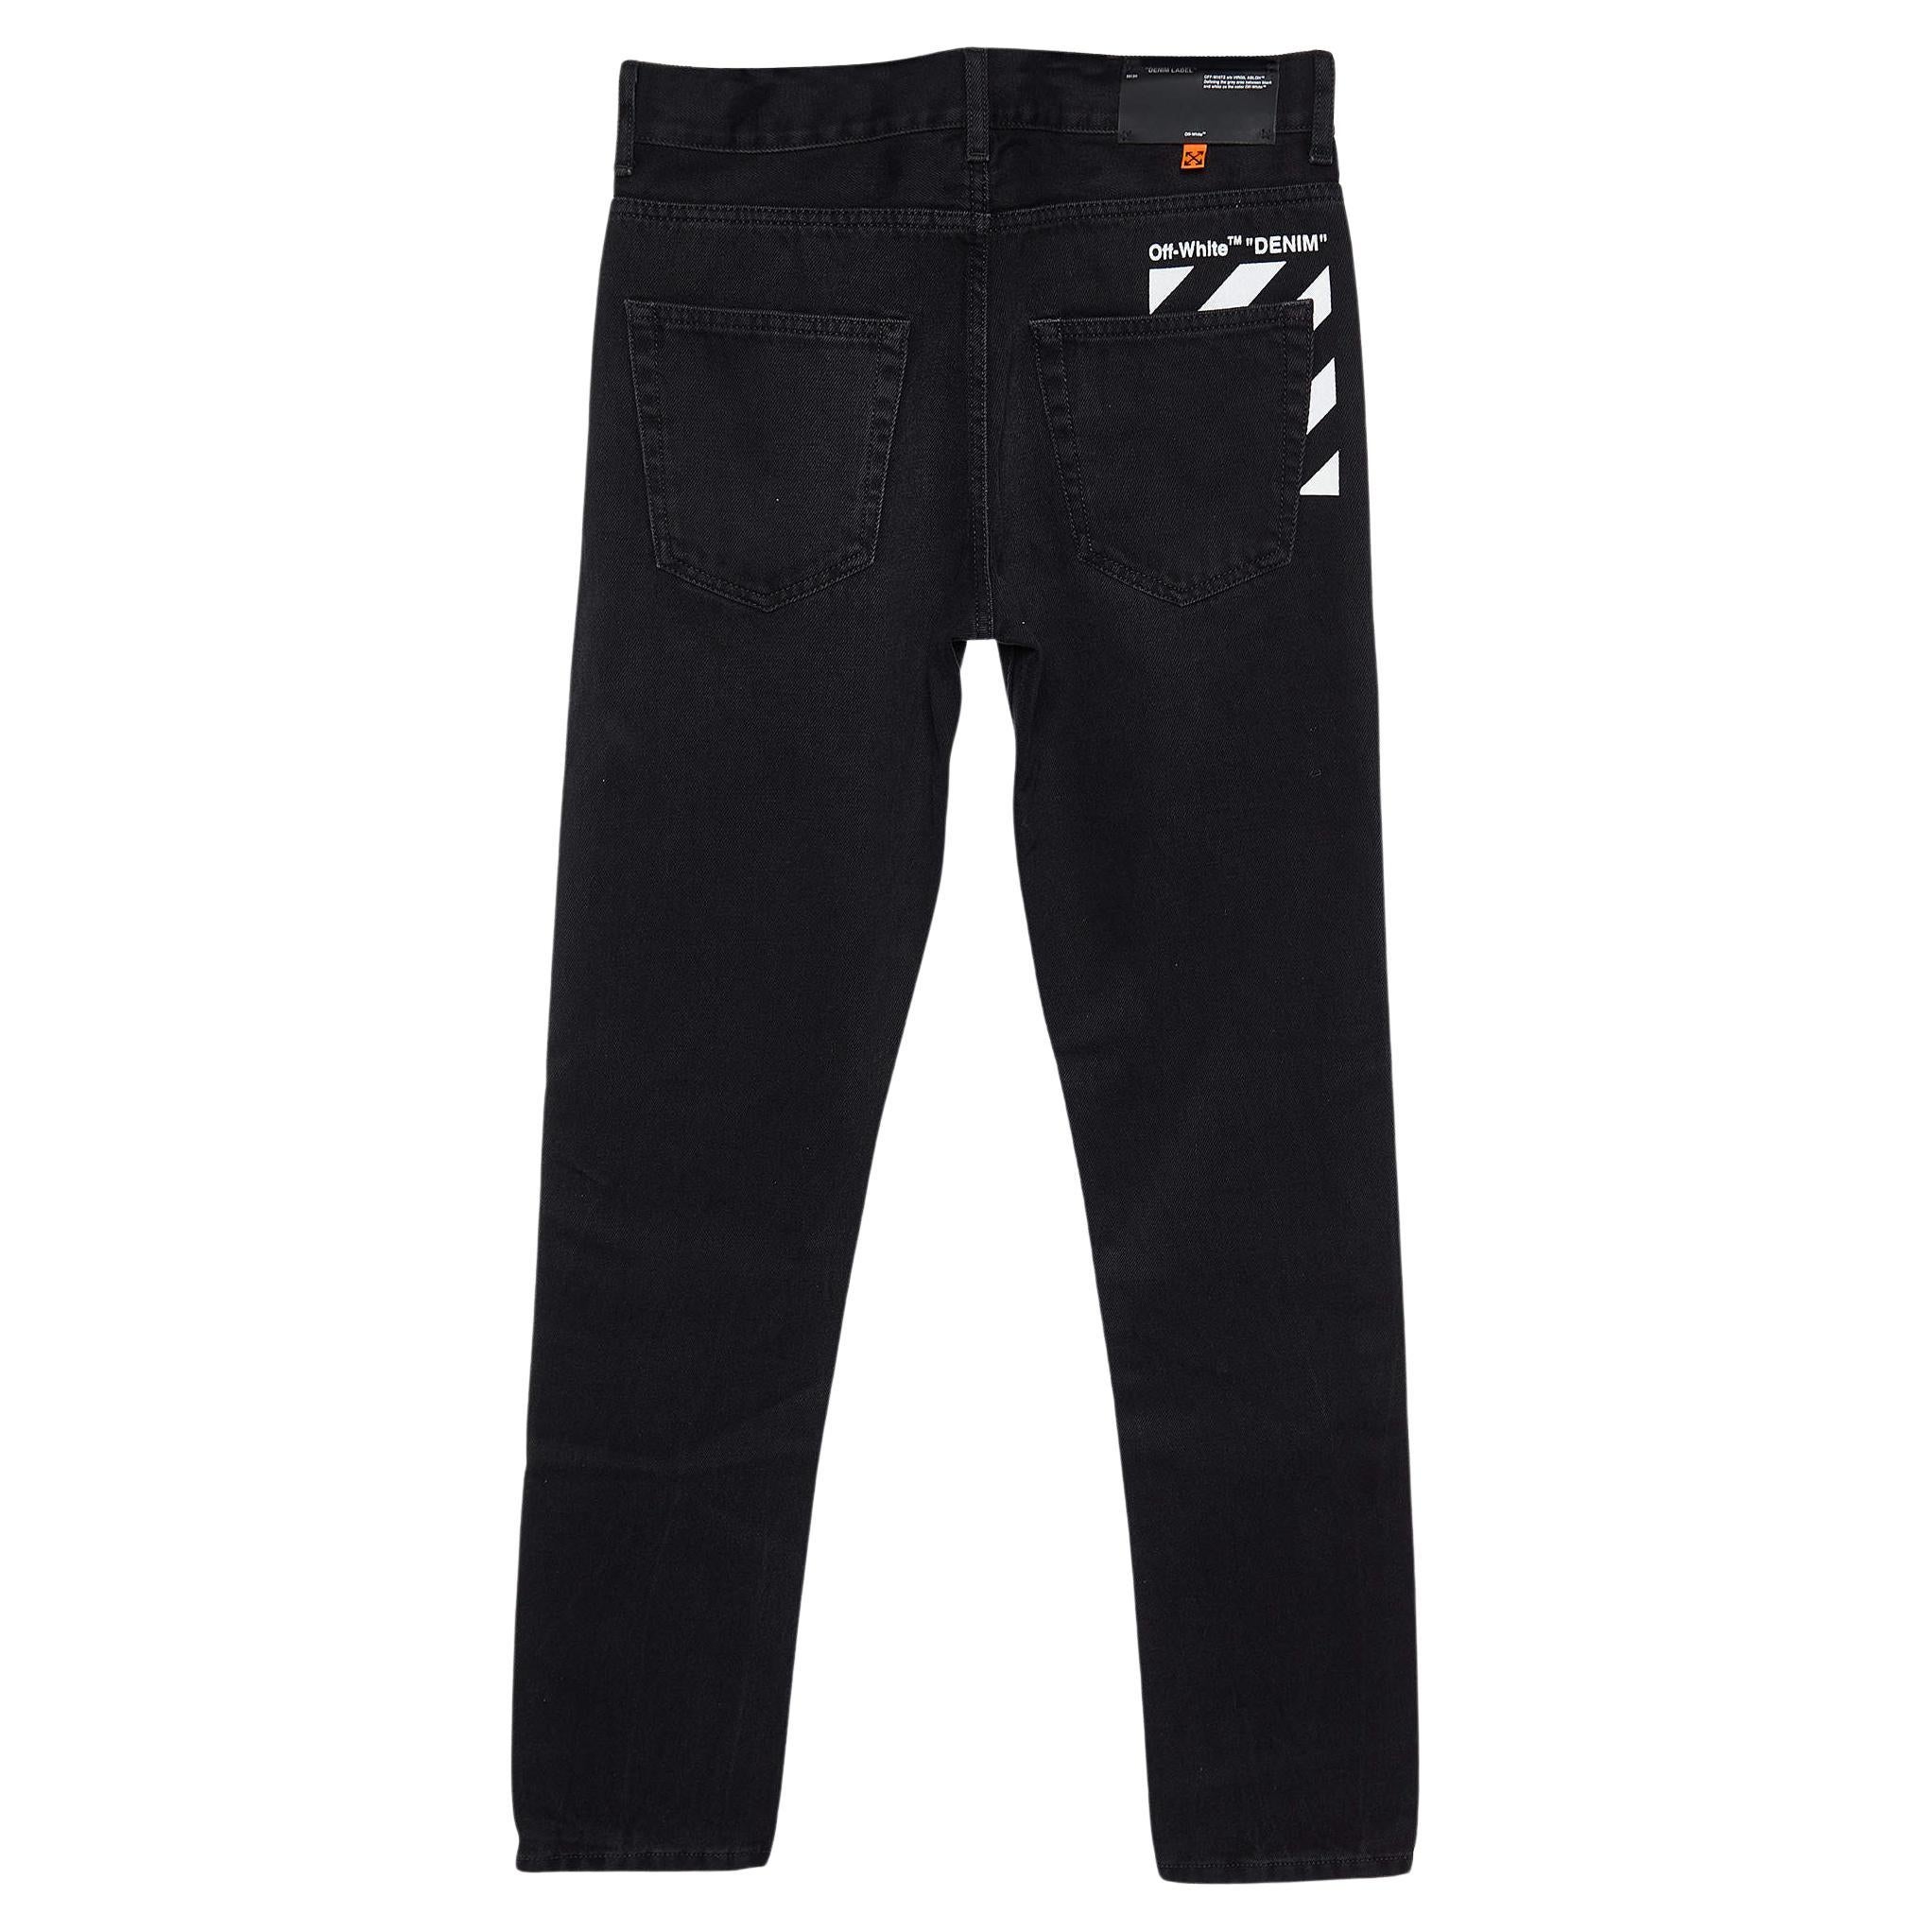 A good pair of Off-White jeans always makes the closet complete. This pair of jeans is tailored with such skill and style that it will be your favorite in no time. It will give you a comfortable, stylish fit.

